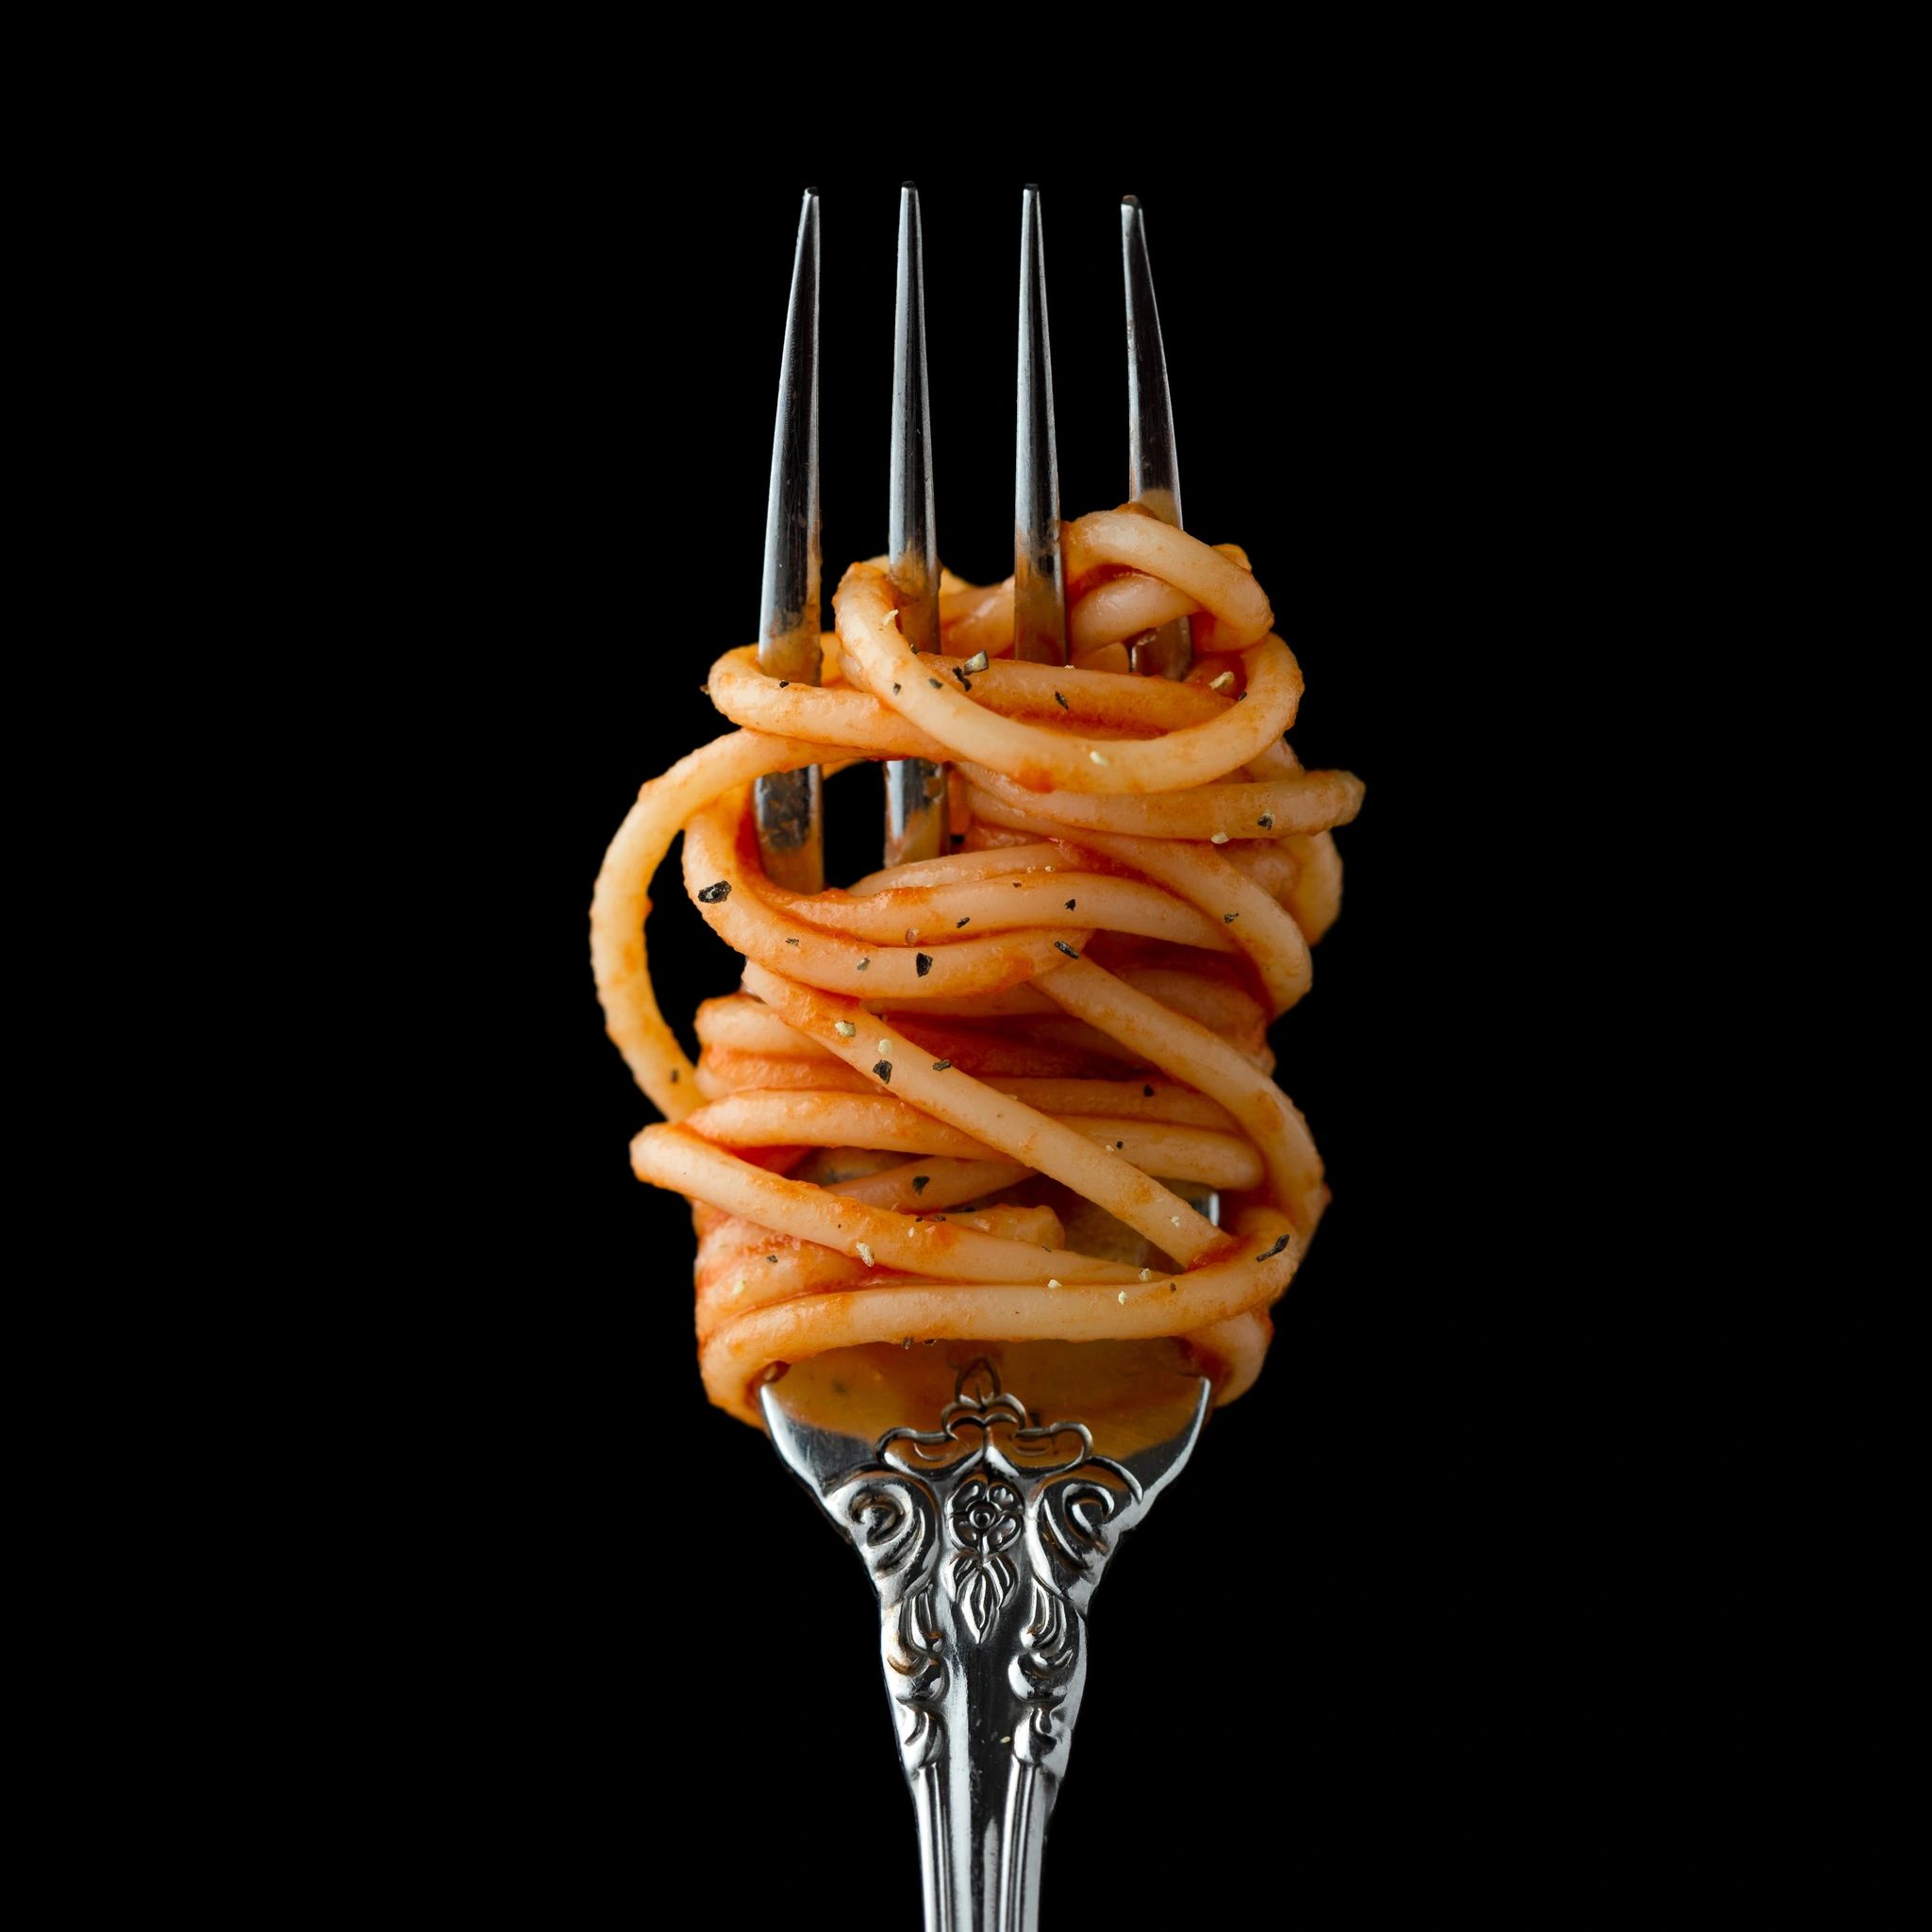 Silver Fork with Spaghetti wrapped around it